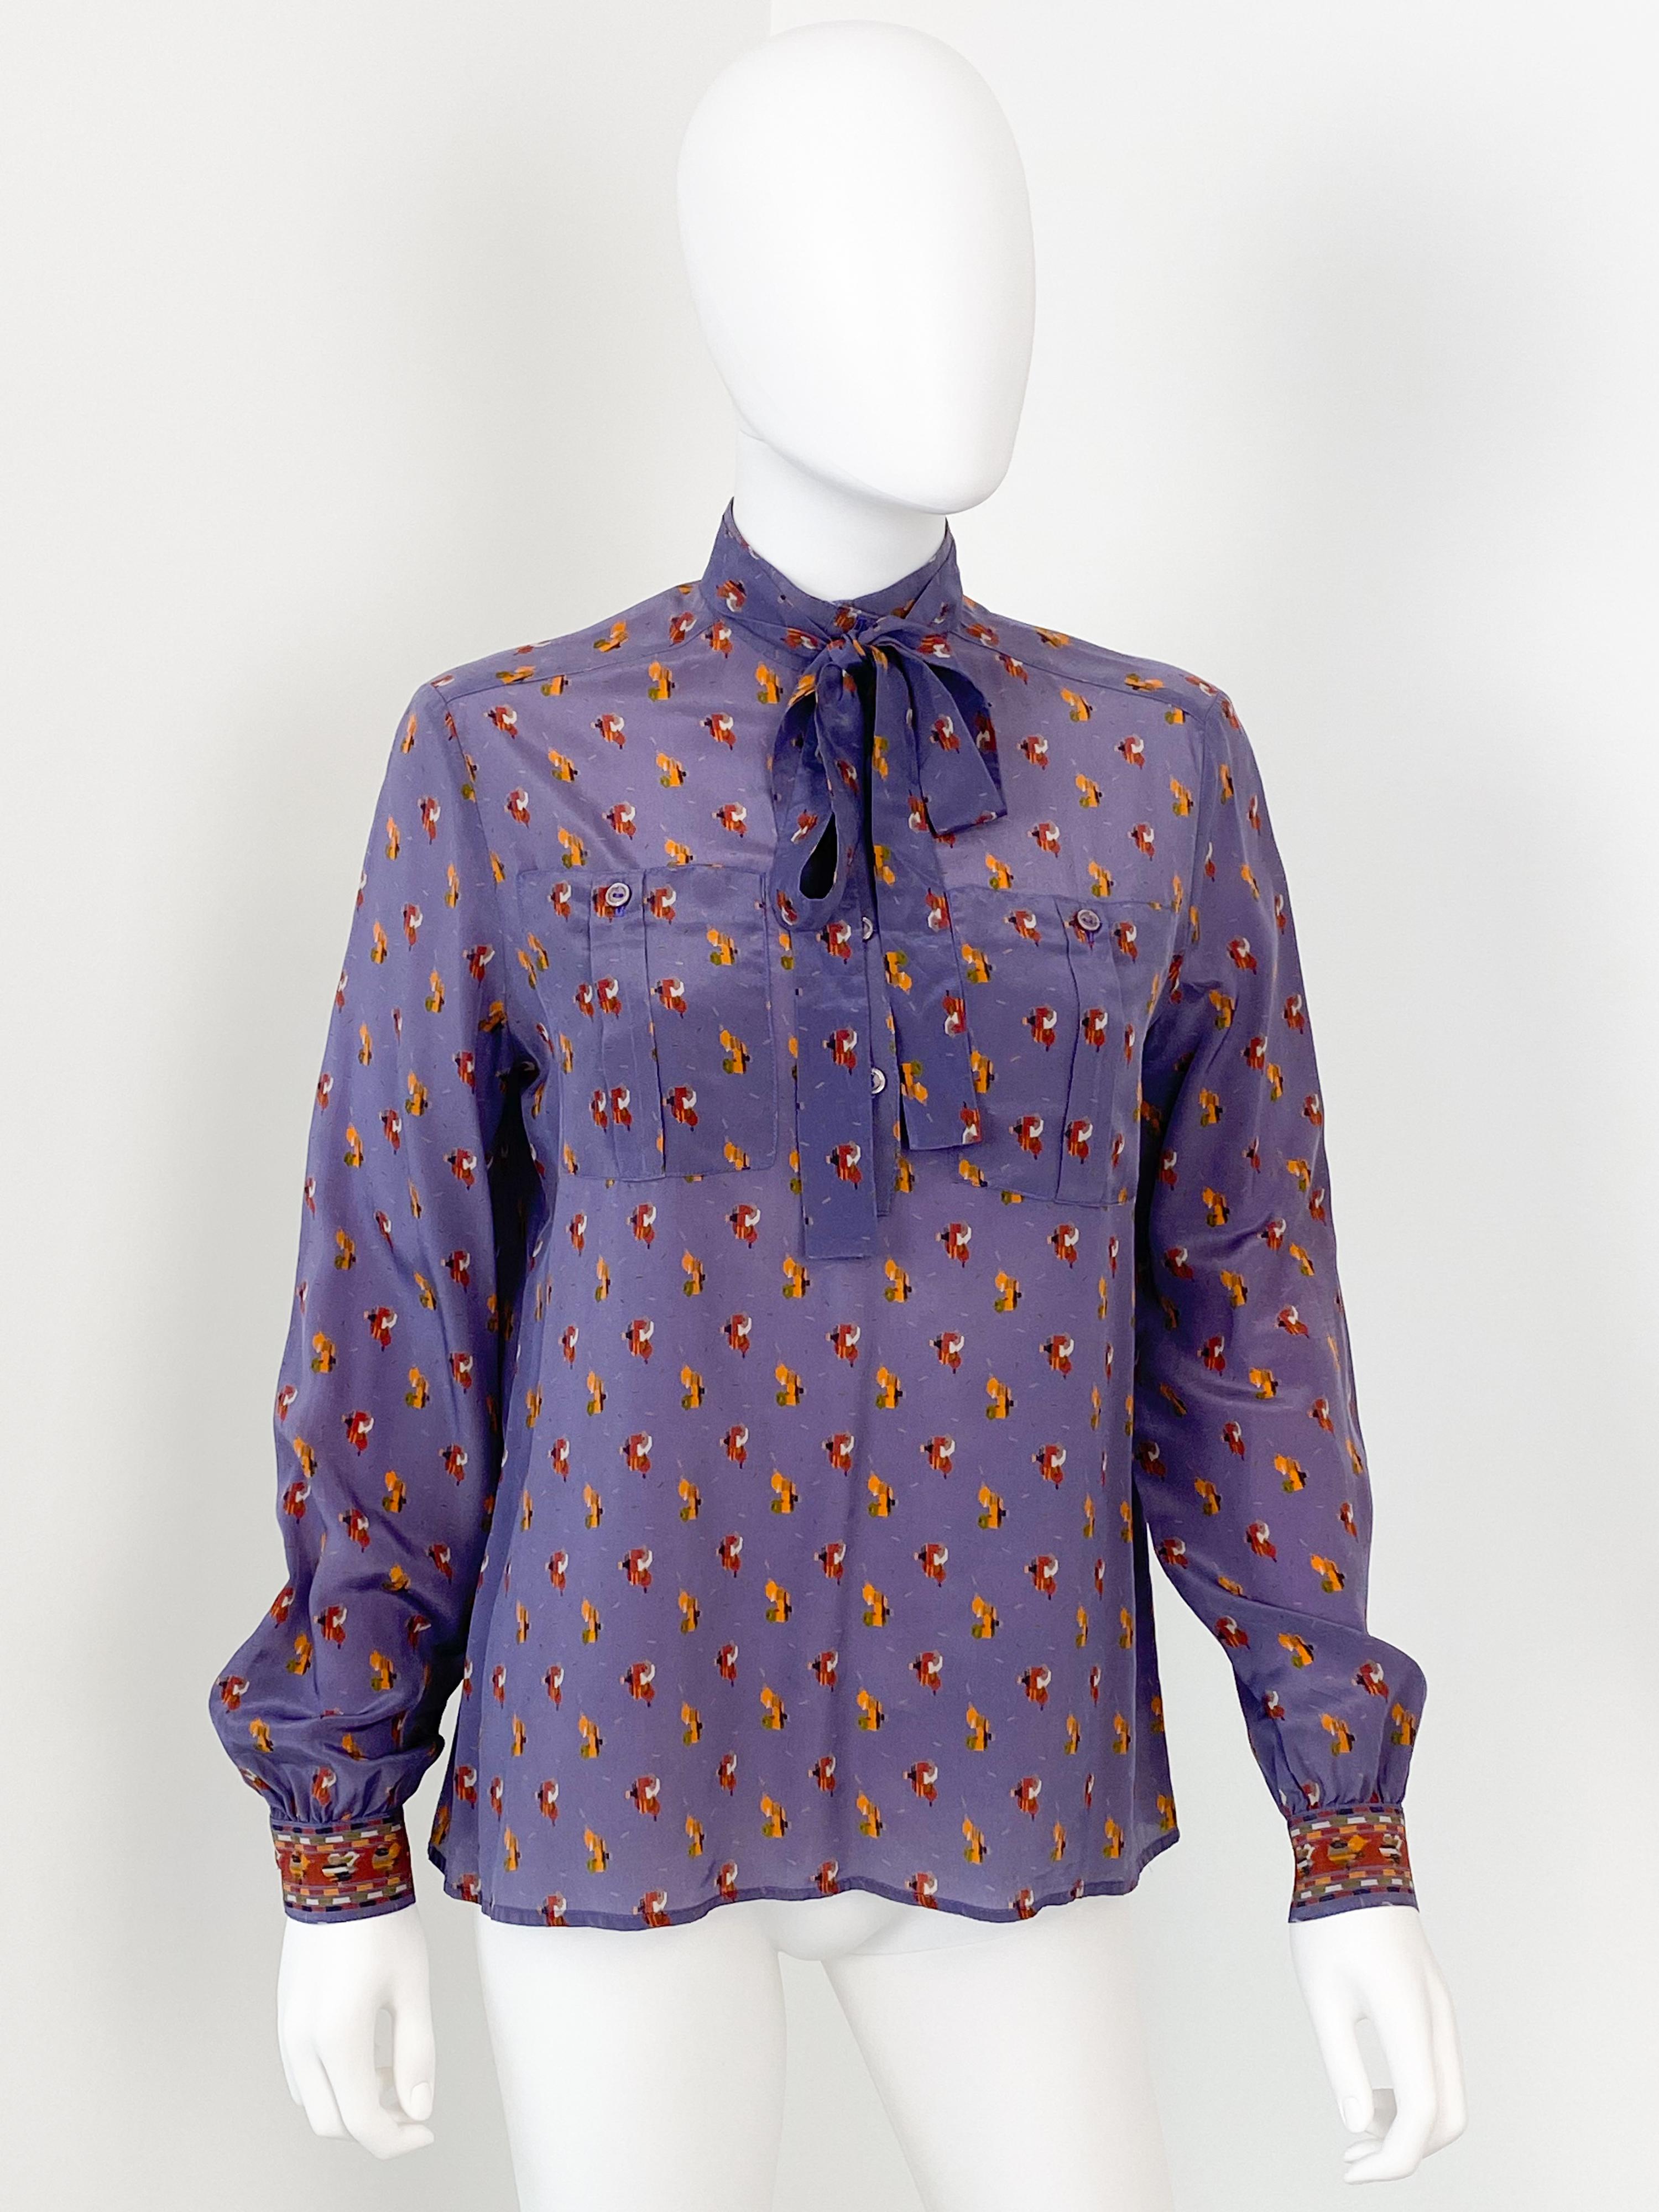 Wonderful vintage 1980s silky polyester blouse in a peasant-style silhouette. Bright purple color fabric with print pattern in orange and burgundy colors. The pullover construction has a partial button front with a tab collar and two pockets. With